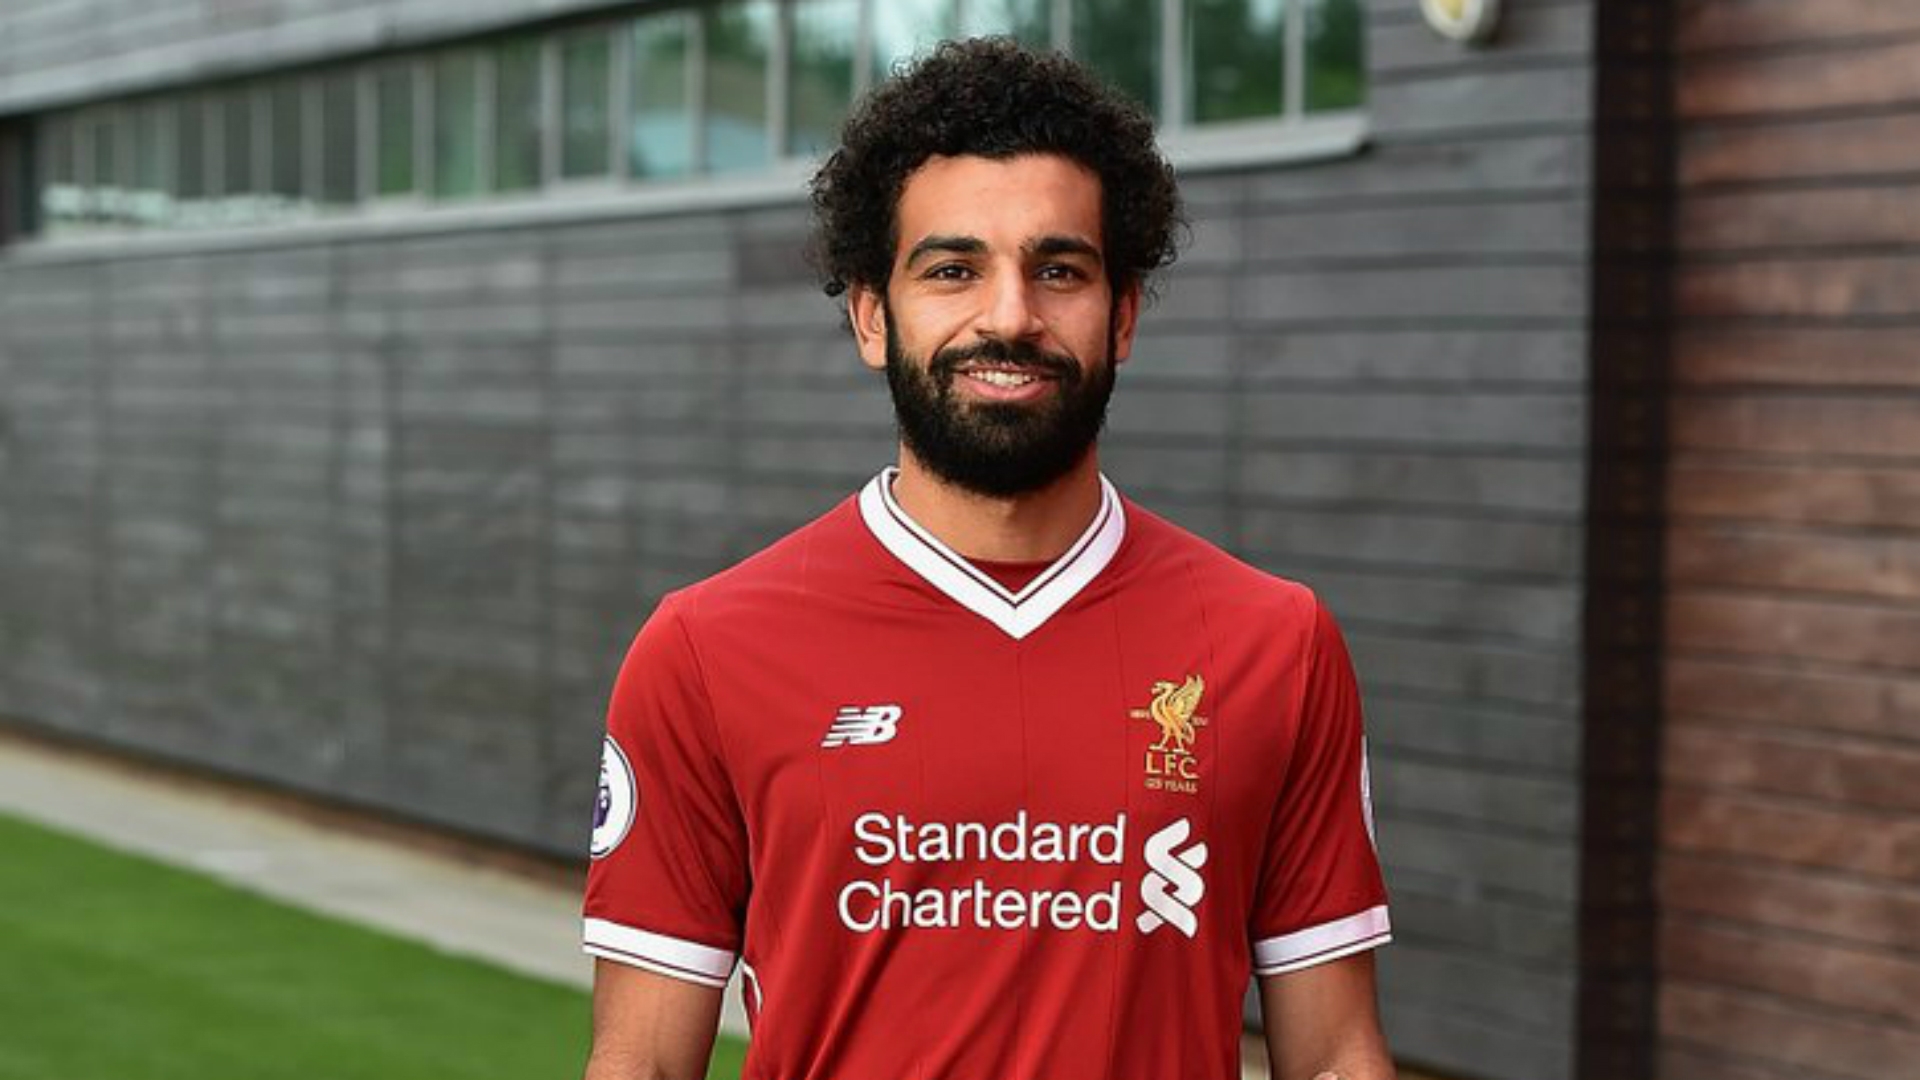 With Salah enjoying the best football of his career and Liverpool seeming to enjoy a resurgence under manager Jurgen Klopp, there are strong hopes for the near future.